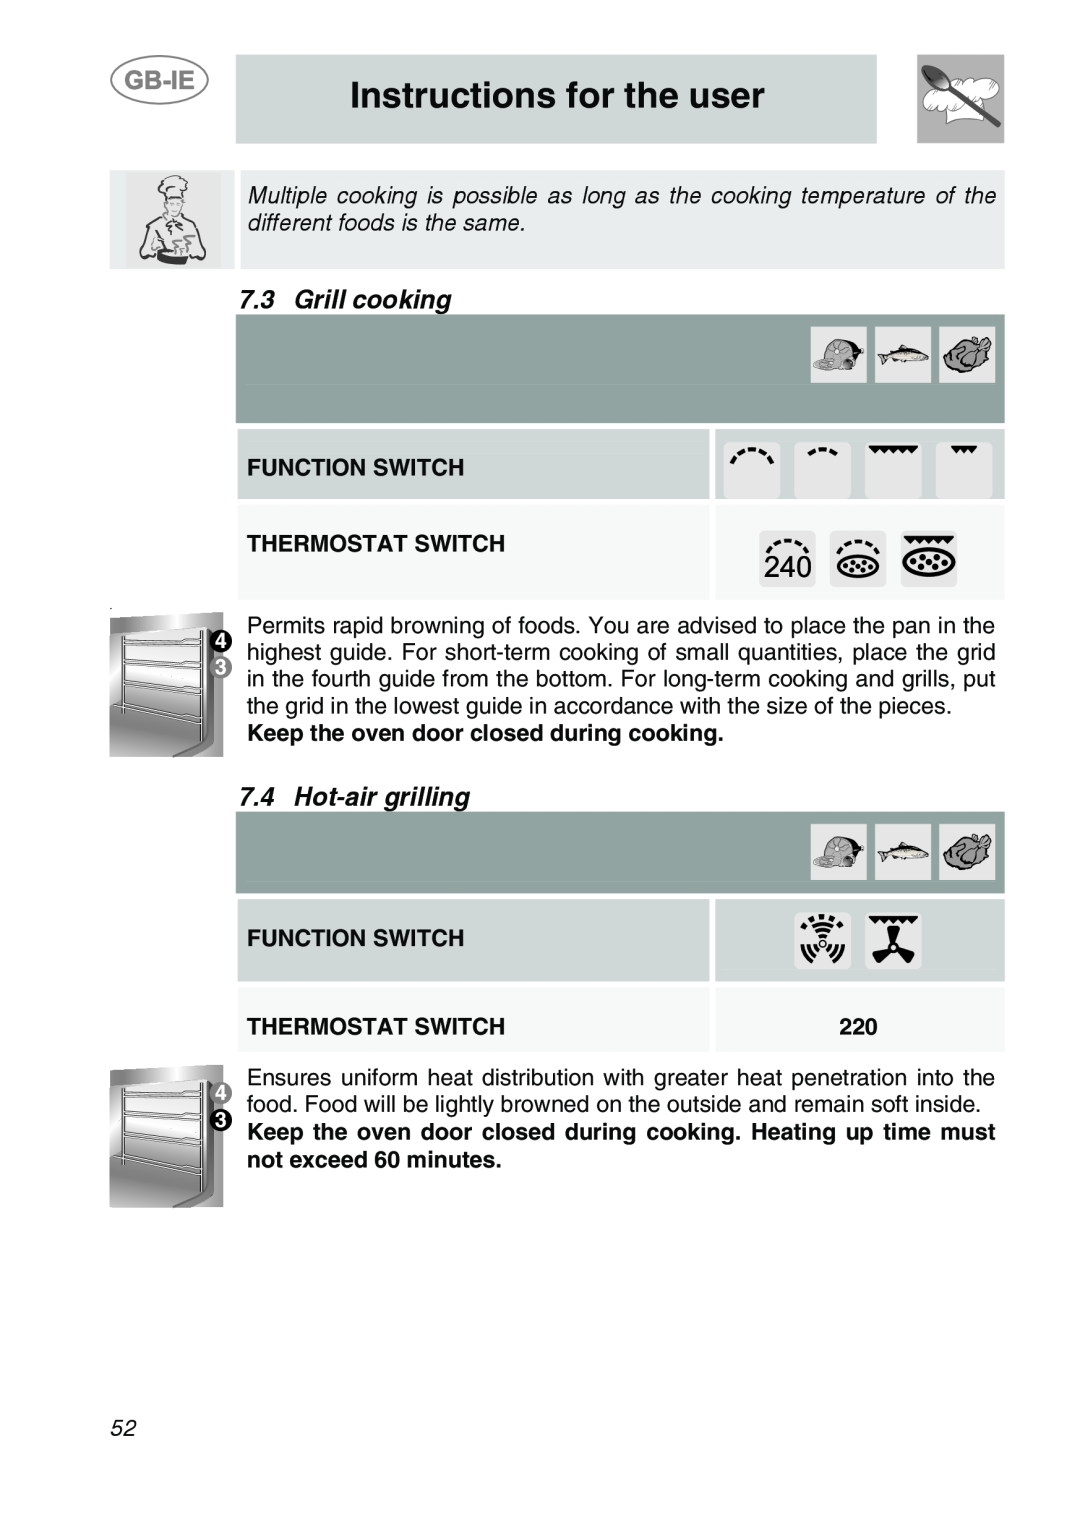 Smeg SC166PZ manual Grill cooking, Hot-air grilling, Instructions for the user, Function Switch Thermostat Switch 